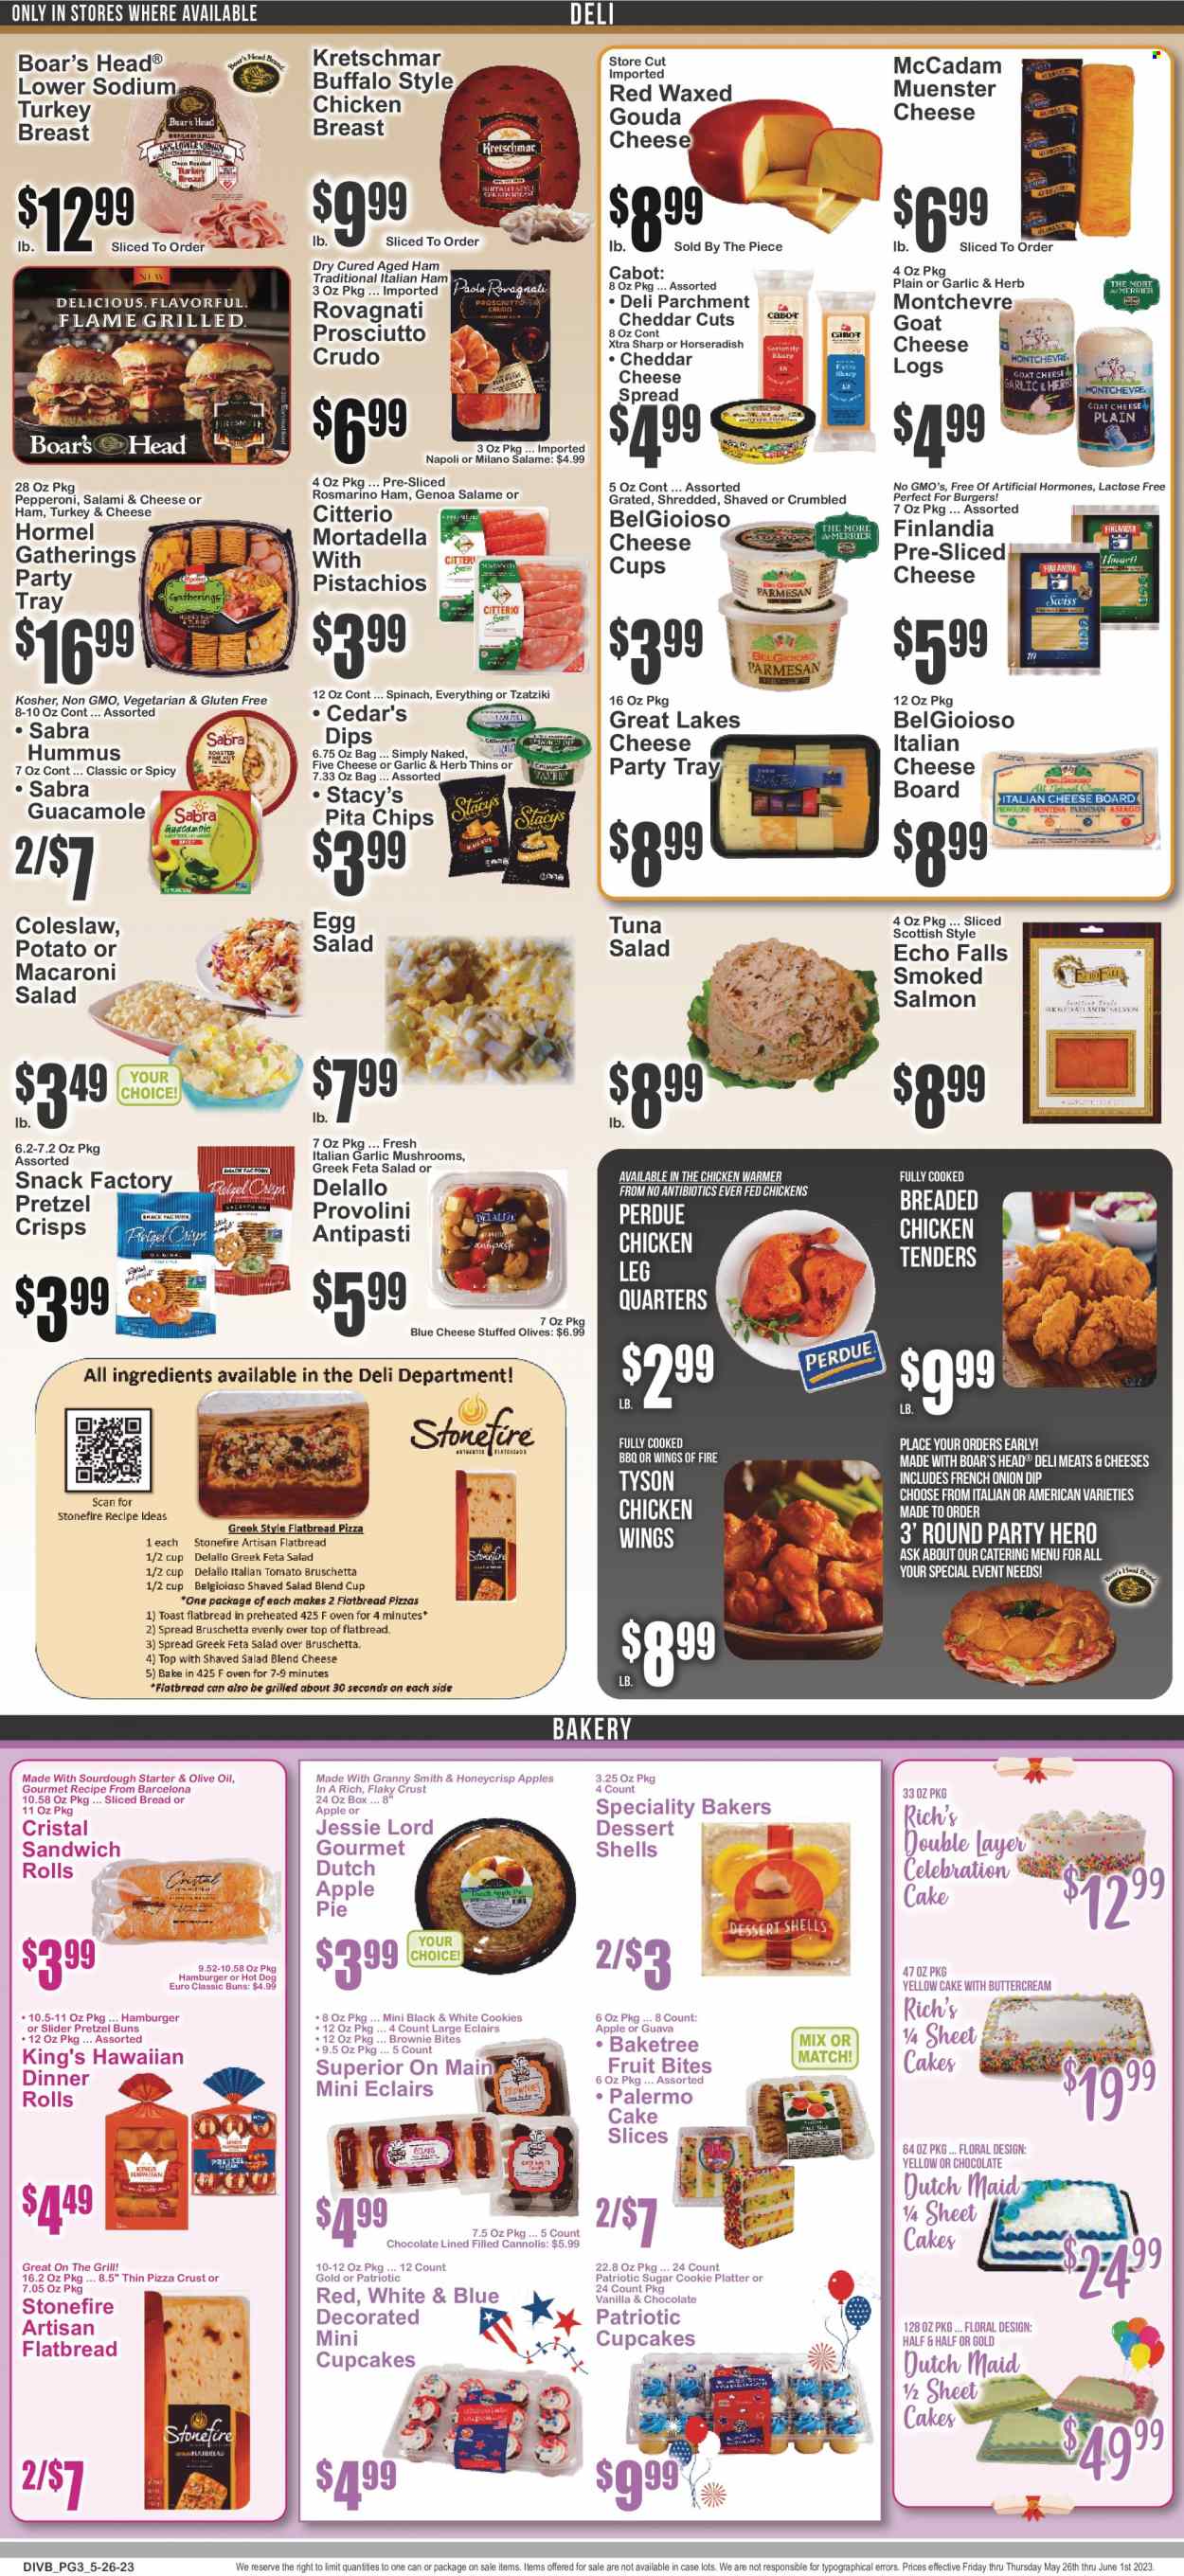 thumbnail - Food Universe Flyer - 05/26/2023 - 06/01/2023 - Sales products - mushrooms, bread, cake, dinner rolls, flatbread, sandwich rolls, apple pie, cupcake, brownies, dessert shells, dessert, horseradish, guava, Granny Smith, salmon, smoked salmon, tuna, coleslaw, hot dog, pizza, hamburger, fried chicken, Perdue®, Hormel, Boar's Head, ready meal, mortadella, salami, prosciutto, tzatziki, hummus, cheese spread, guacamole, macaroni salad, tuna salad, antipasti, blue cheese, gouda, sliced cheese, cheese cup, Münster cheese, feta, Montchevre, chicken wings, cookies, Celebration, chips, Thins, pretzel crisps, pita chips, sourdough starter, sugar, olives, olive oil, oil, chicken breasts, chicken legs, turkey, XTRA, cup, cheese board, platters, Sharp, Bakers, grill, Half and half. Page 3.